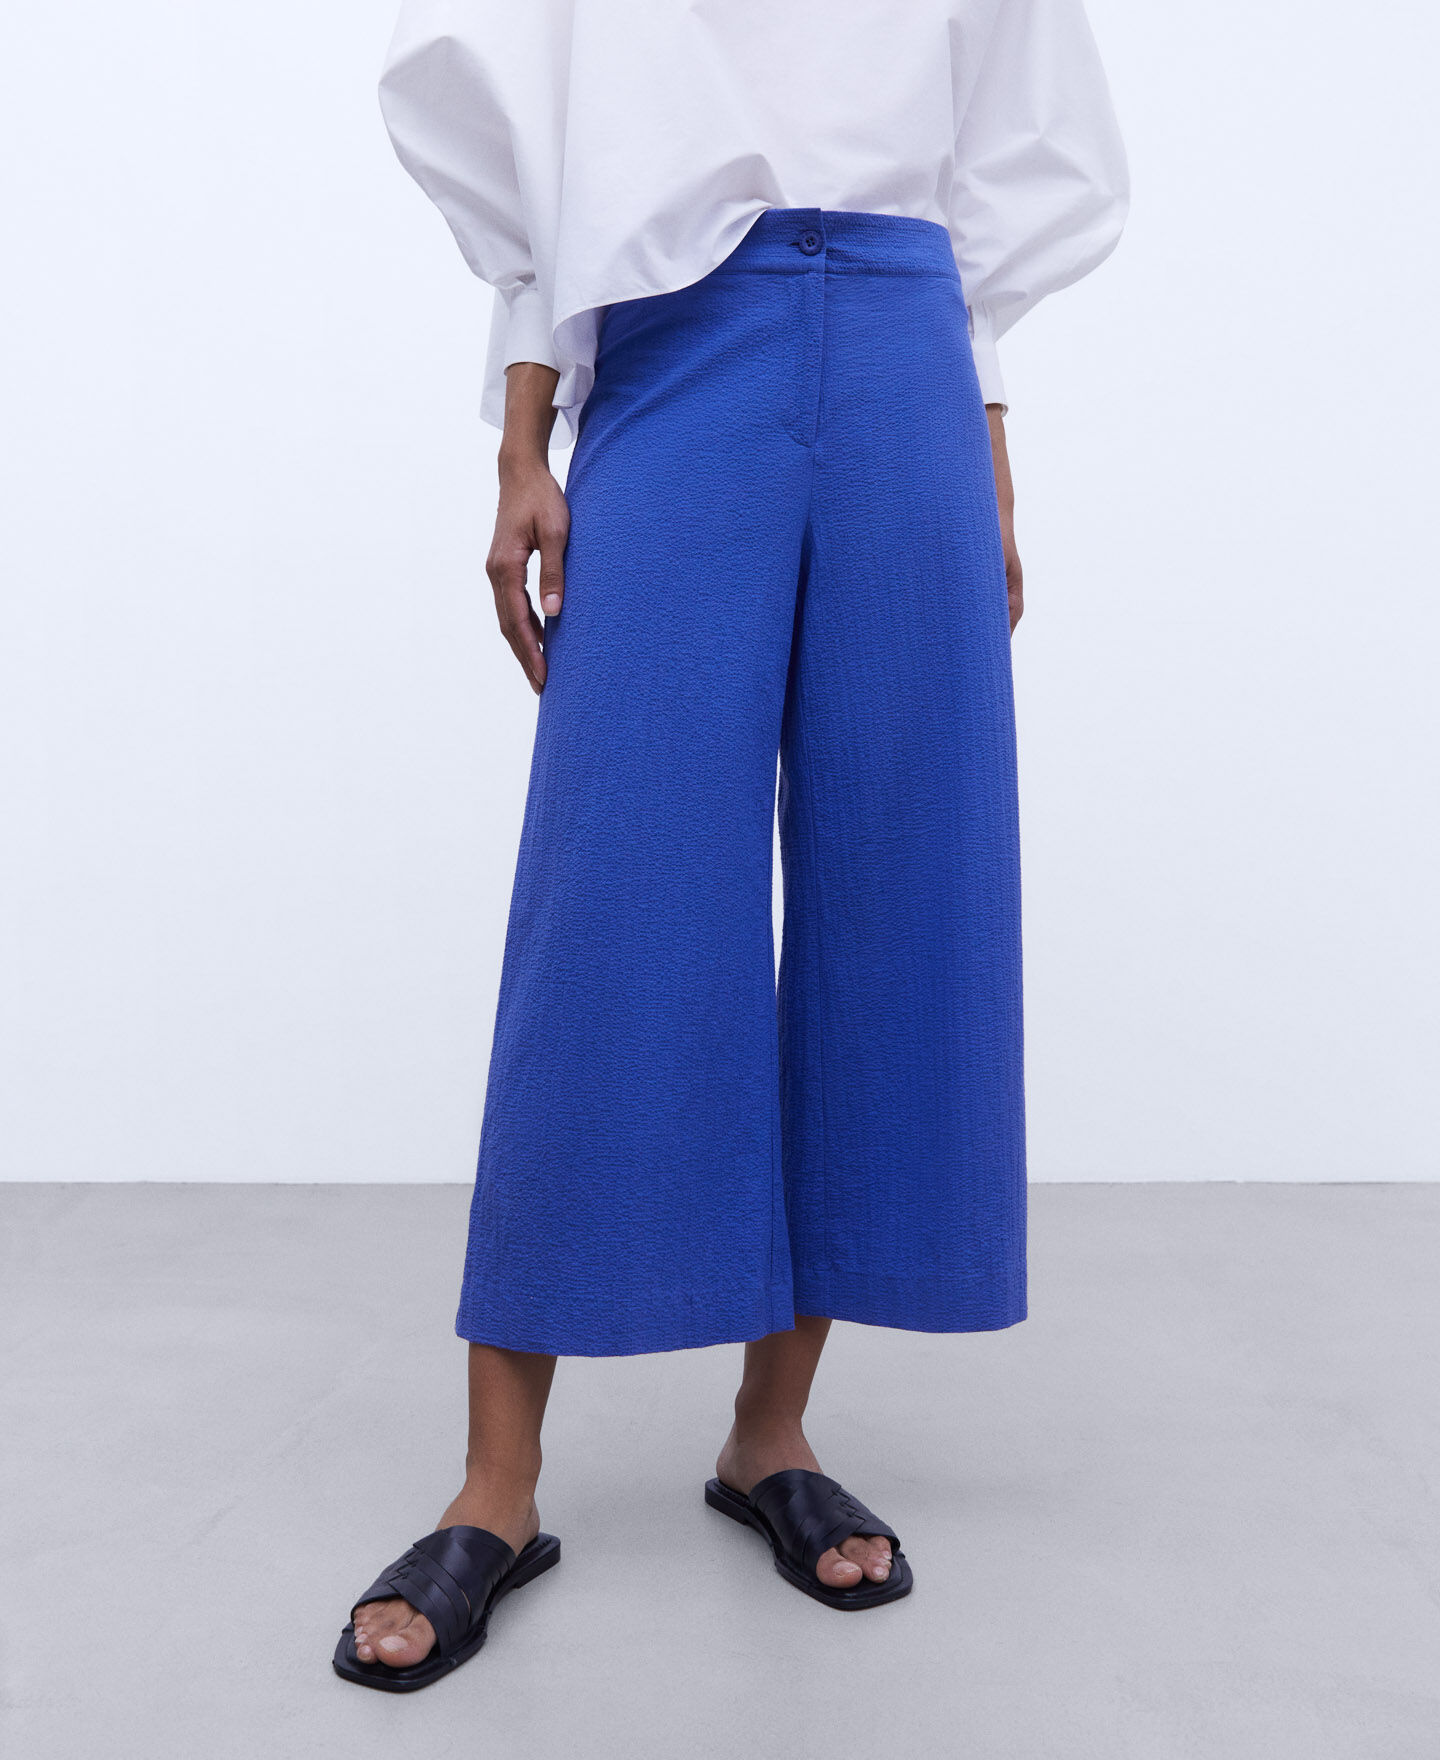 Women's Trousers: Spring-Summer 23 | Adolfo Domínguez